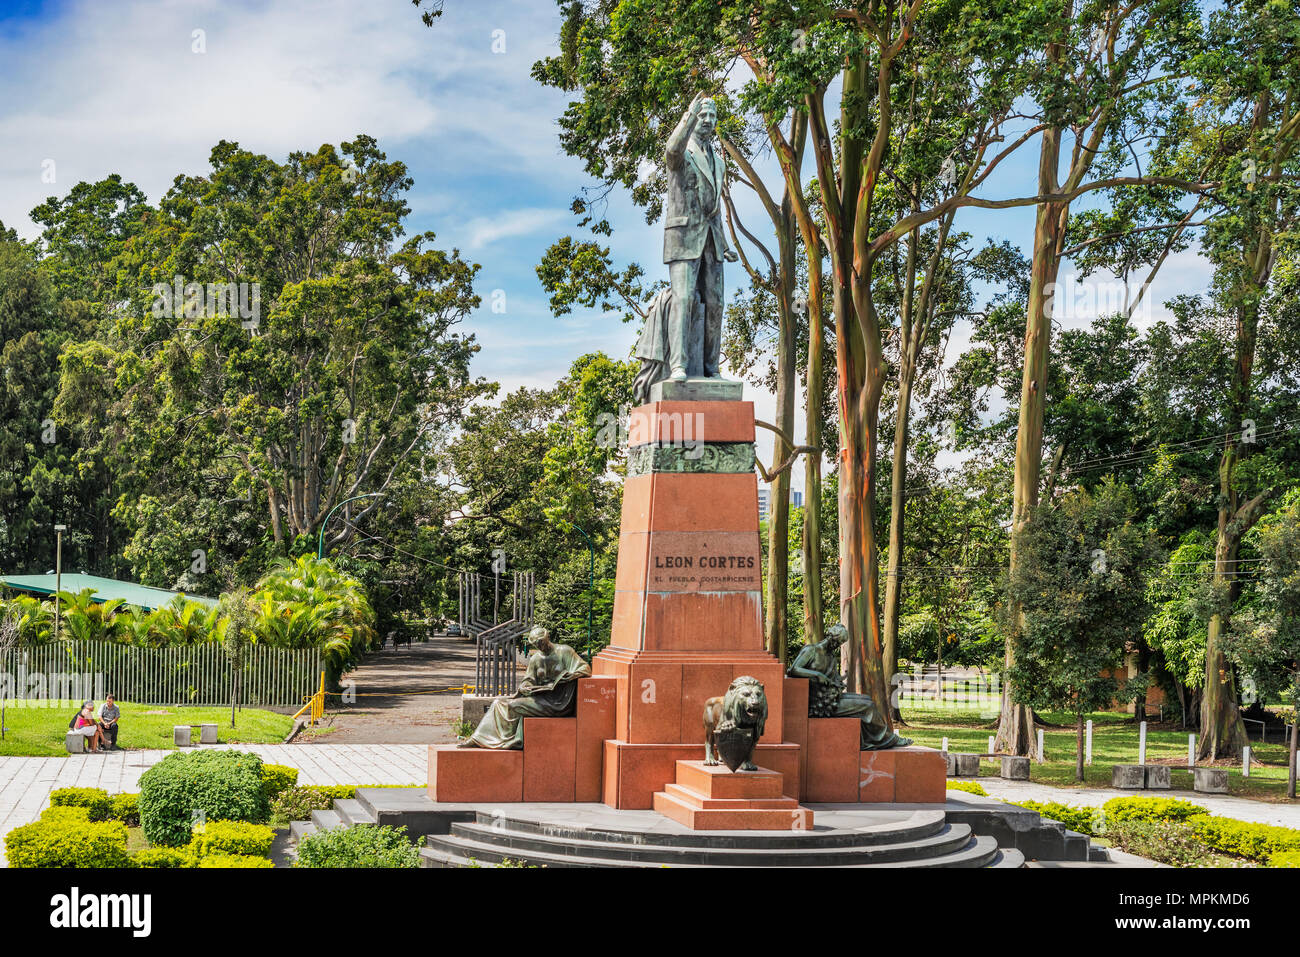 San Jose, Costa Rica - November 10, 2016: The statue of 1930s president León Cortes located at the principal entrance at the west end of Paseo Colon.  Stock Photo